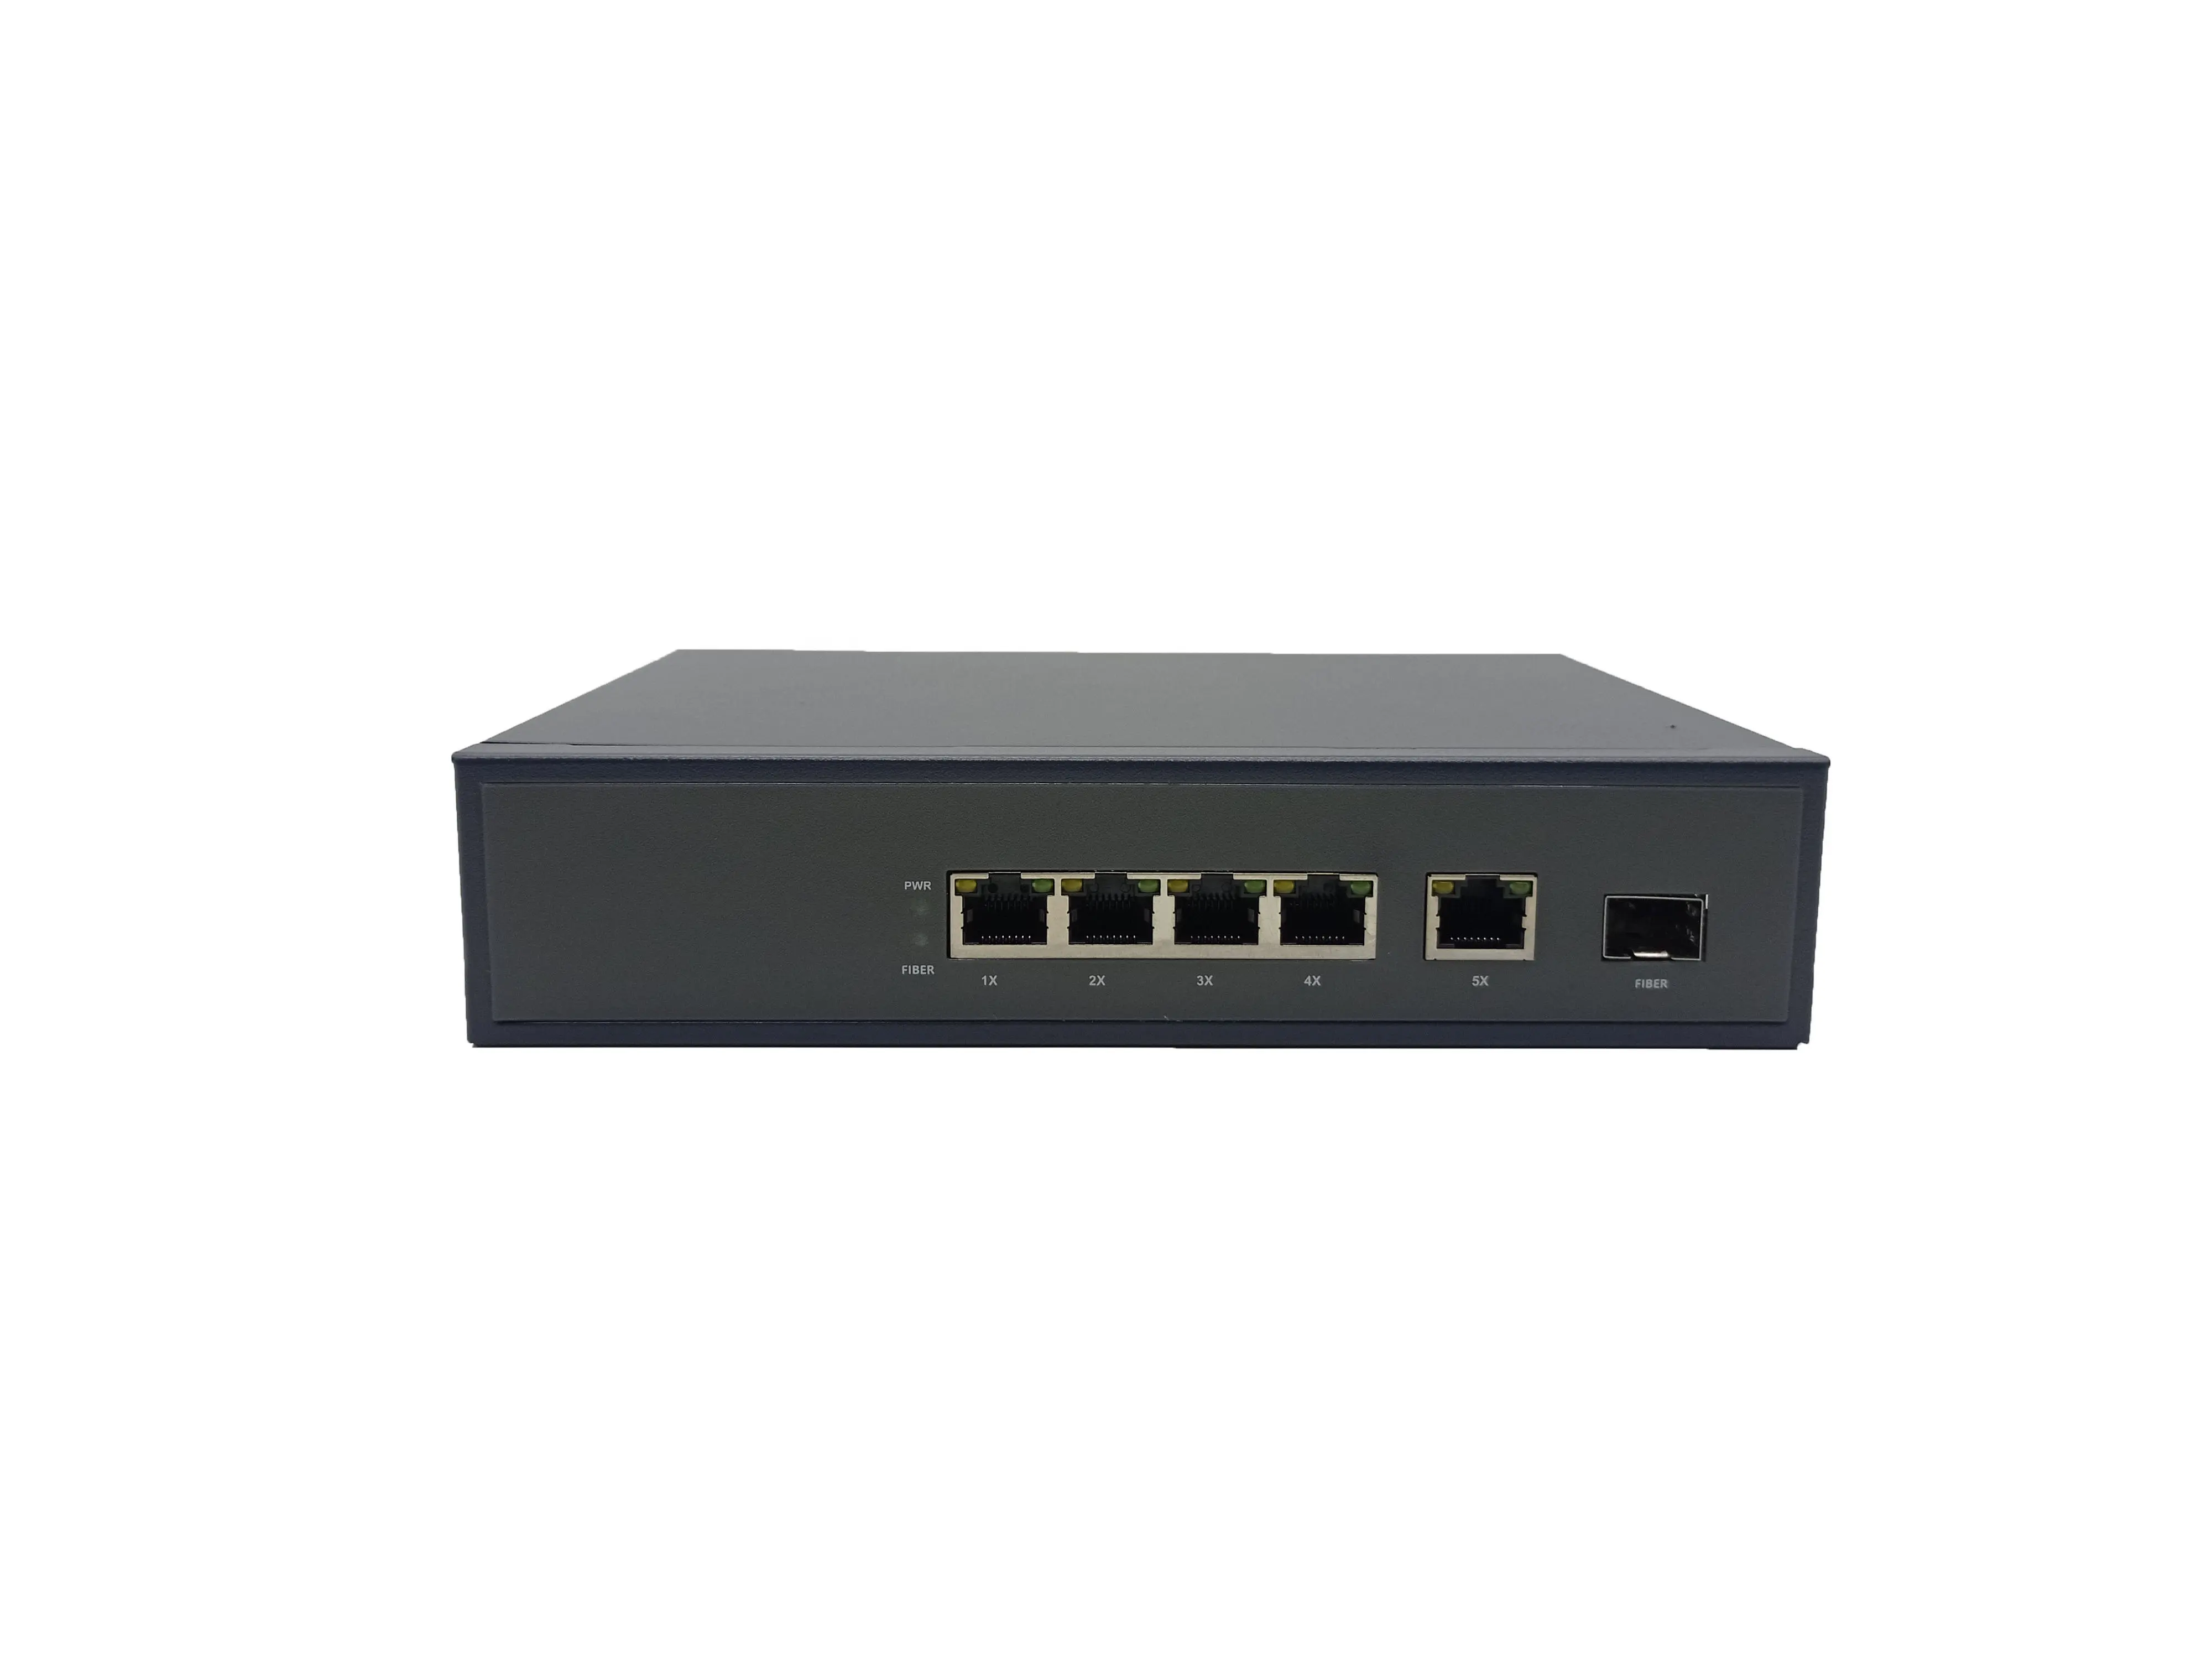 Hot-sell 4 Port CCTV IP Network Poe Switch With 1x 1000M RJ45 And 1SFP Gigabit For CCTV IP Camera